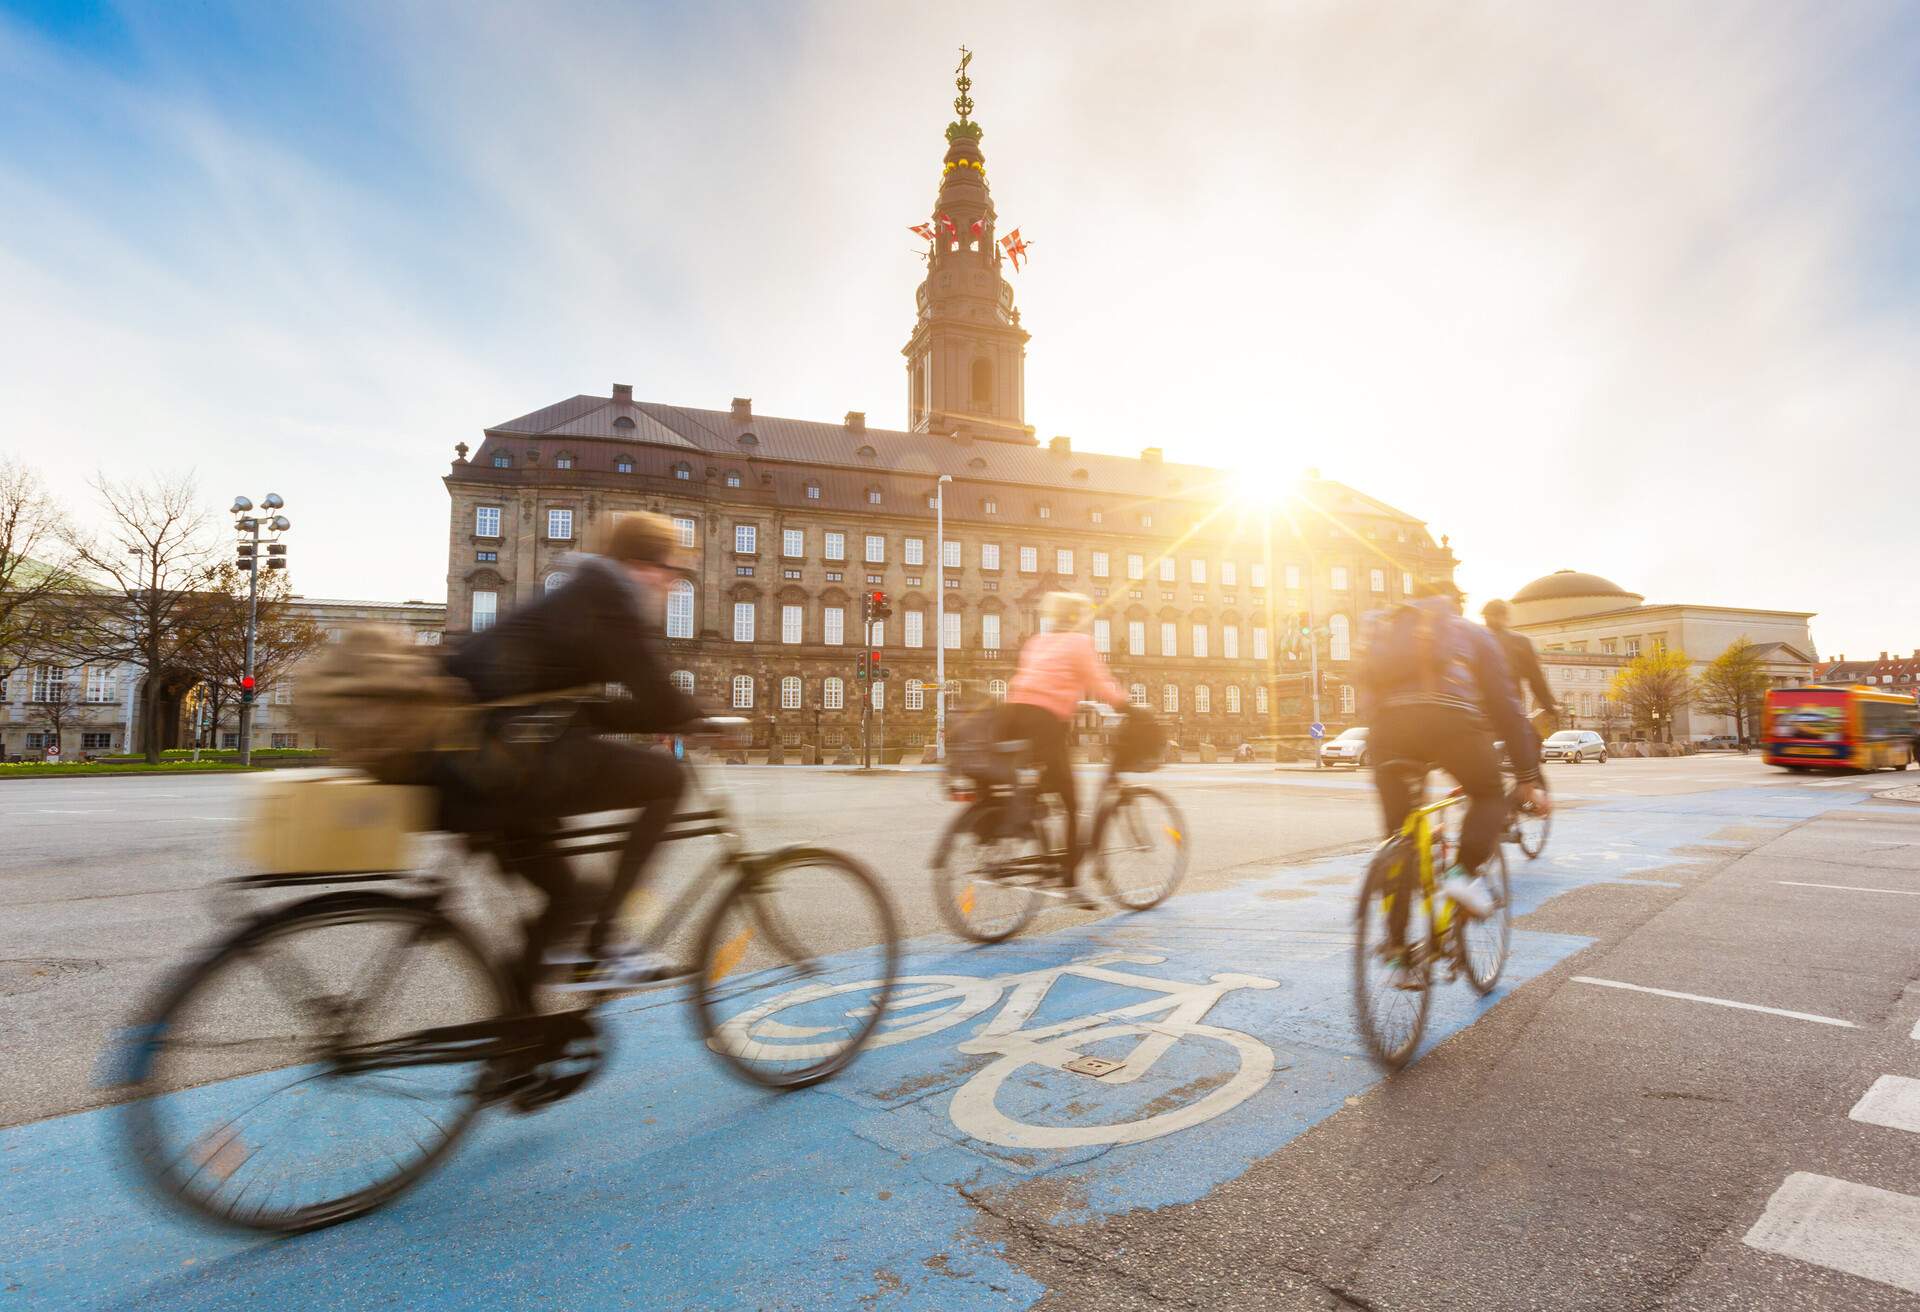 Blurred people going by bike in Copenhagen, with Christiansborg palace on background. Many persons prefer biking instead of taking car or bus to move around the city. Urban lifestyle concept.